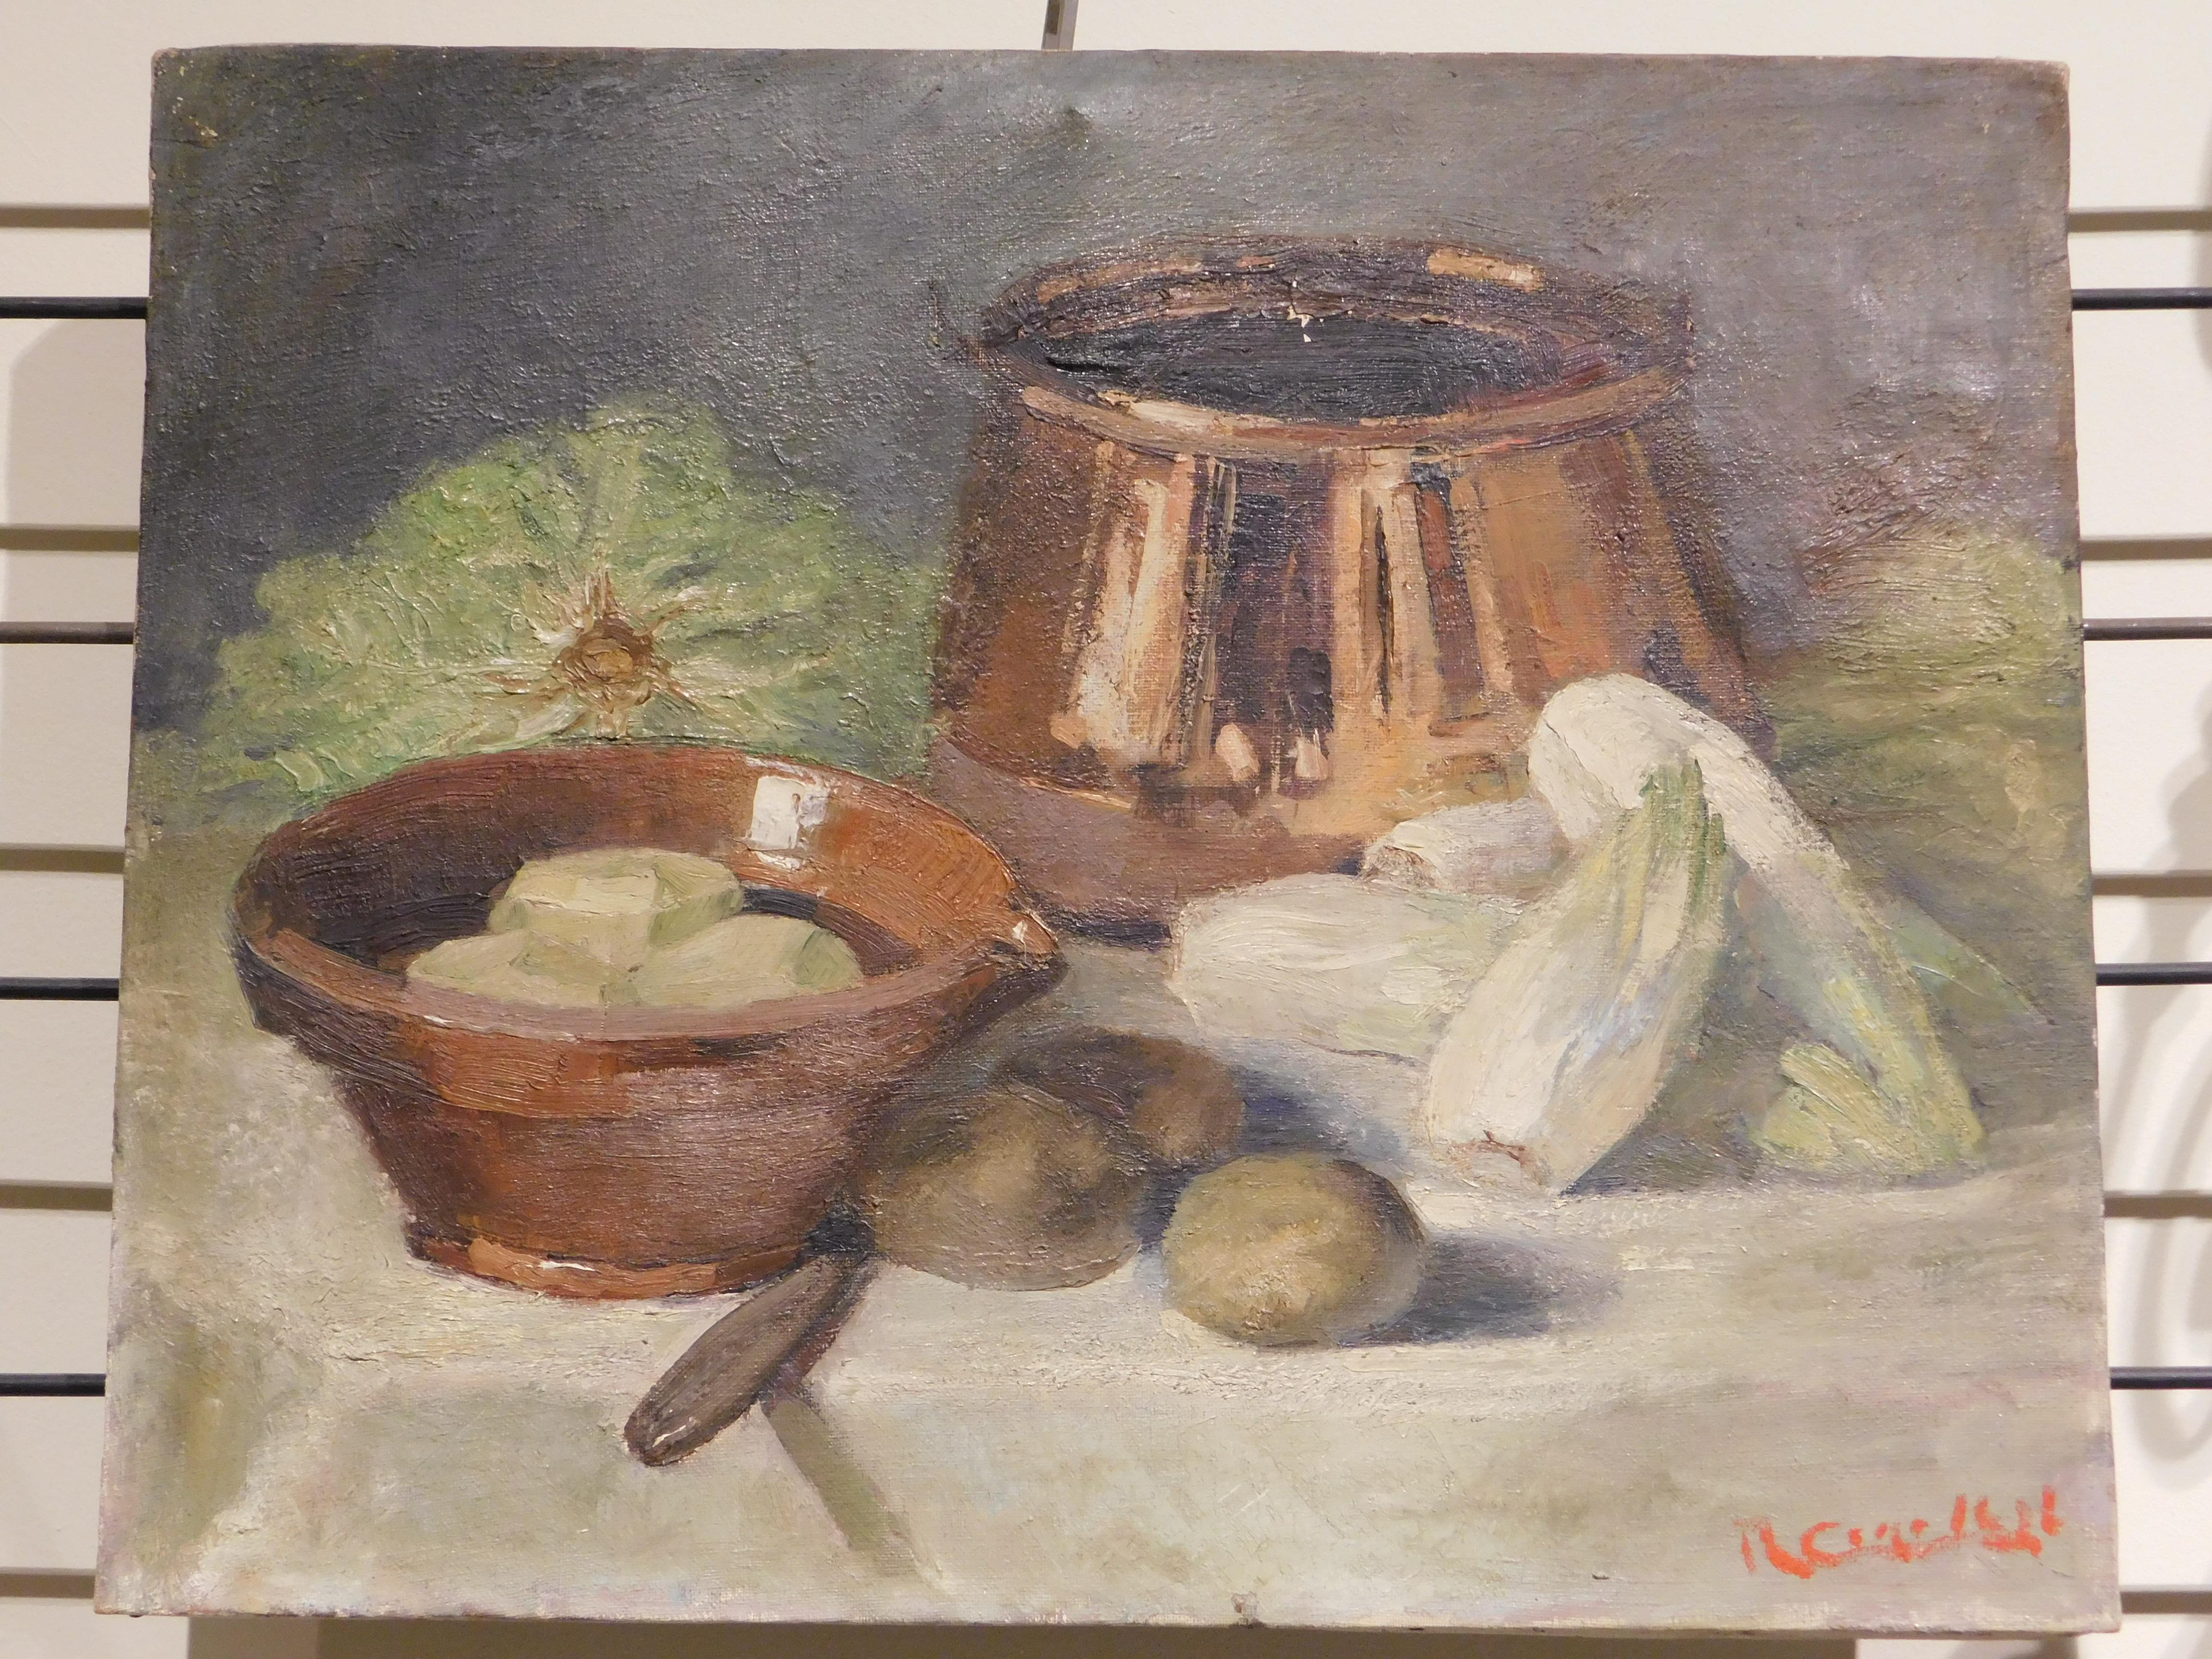 Still life oil painting on canvas signed lower right (illegible), circa 1940.
A charming kitchen scene of typical Flemish winter vegetables being prepared for a stew has been captured by the artist using the impasto technique to add depth and